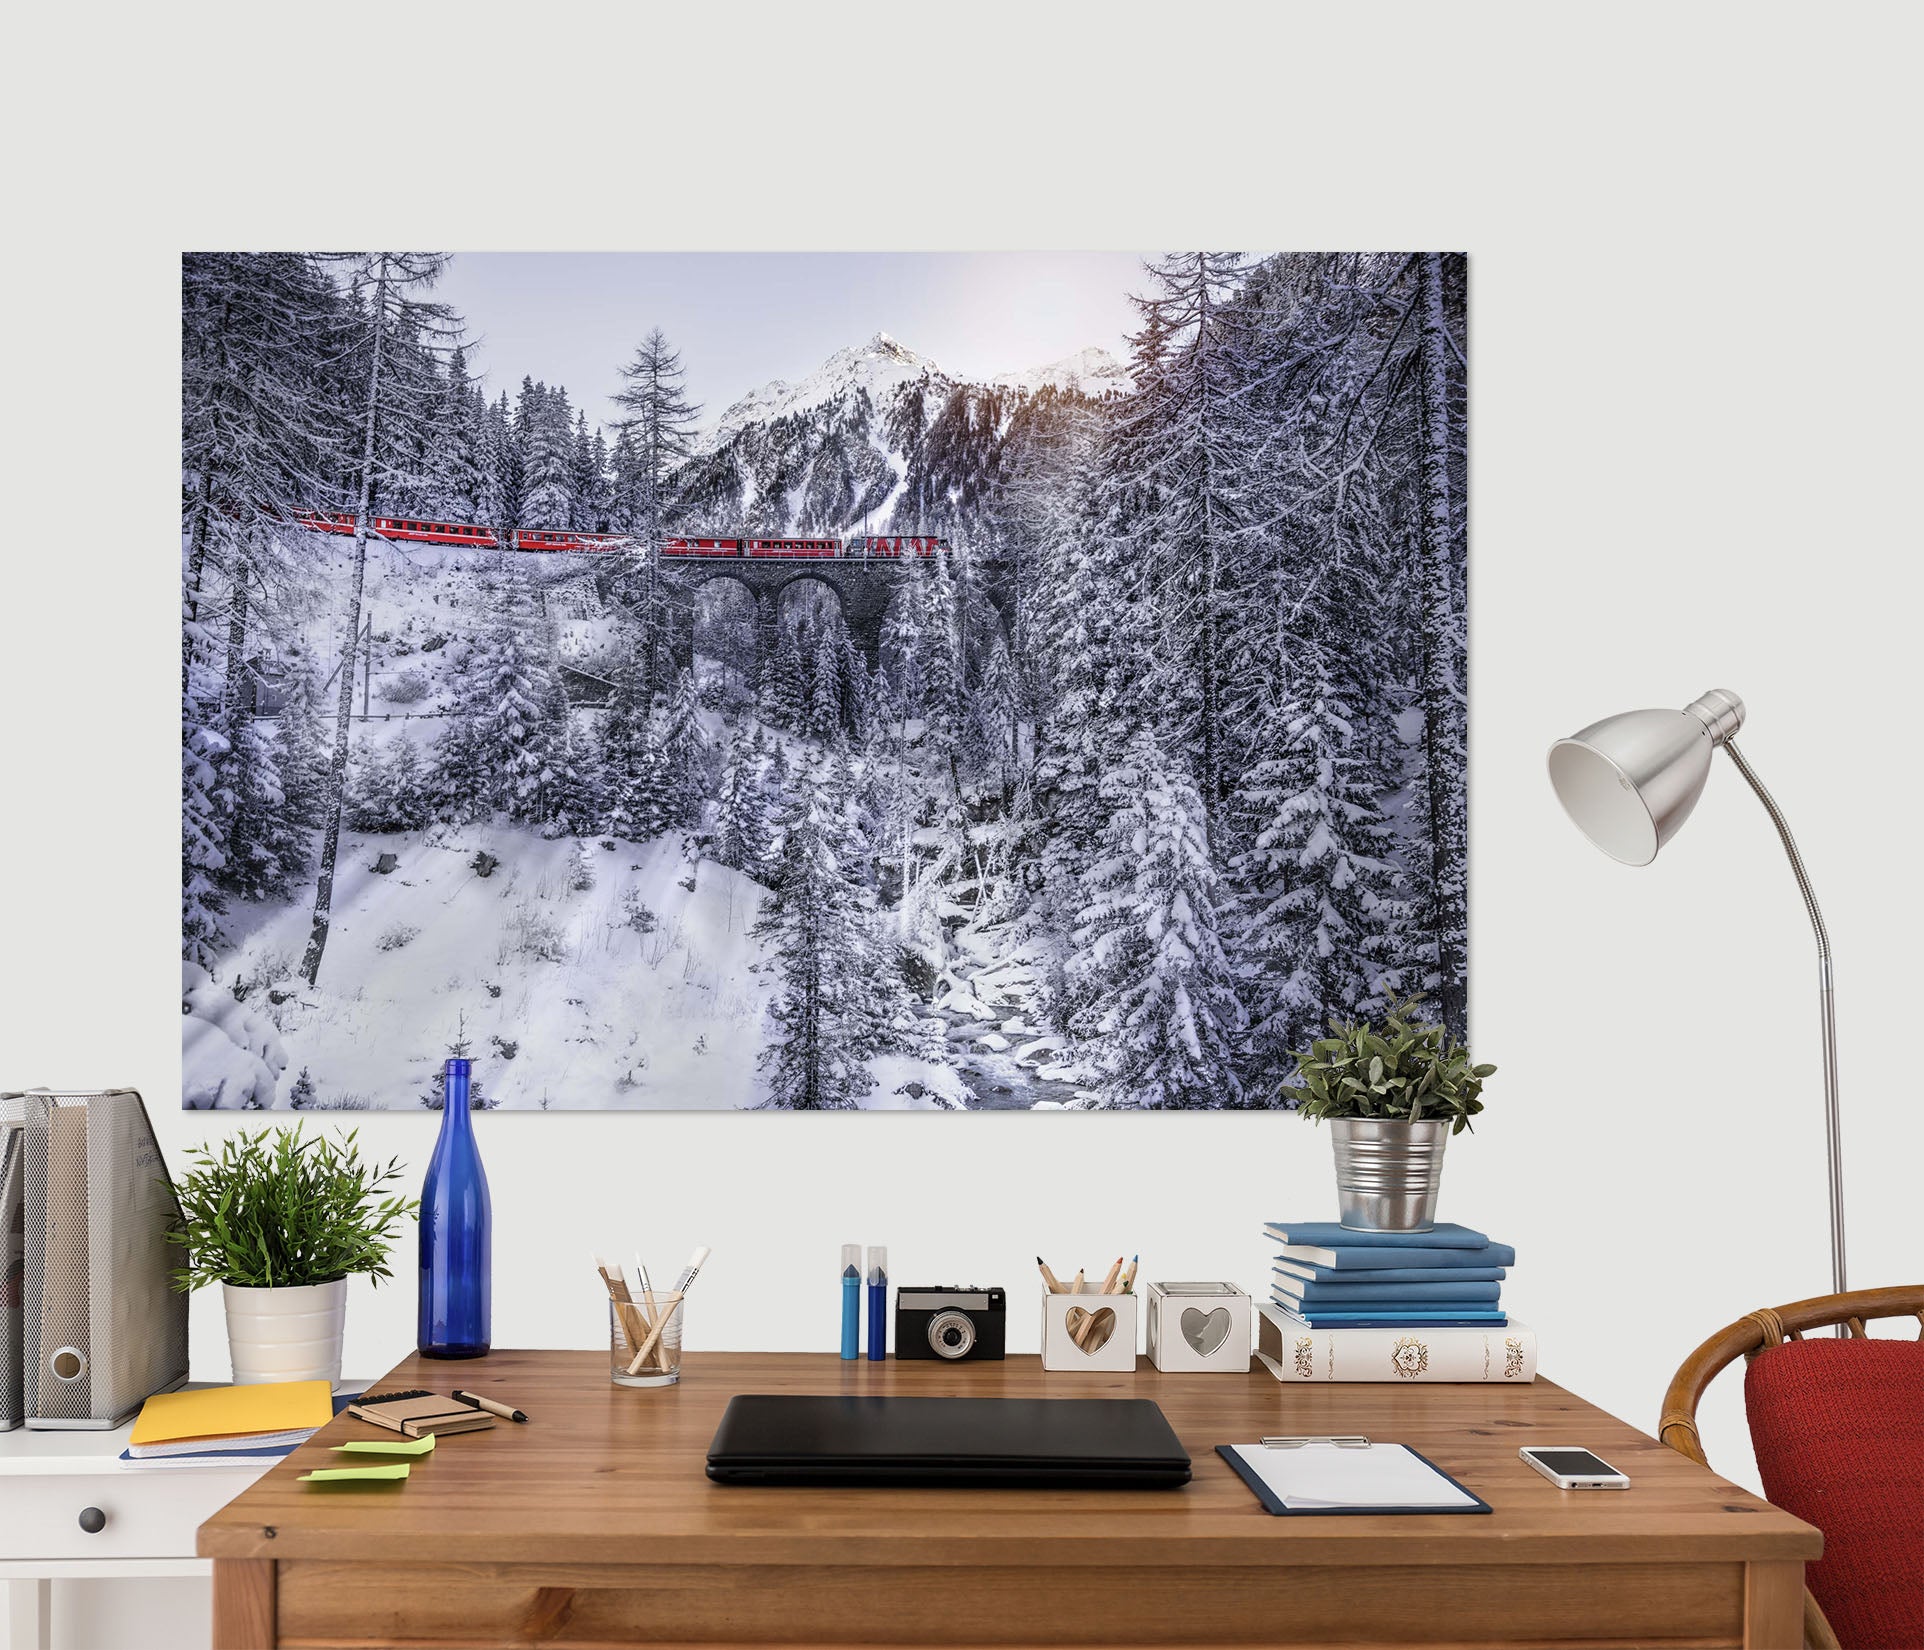 3D Snow Mountain Forest 146 Marco Carmassi Wall Sticker